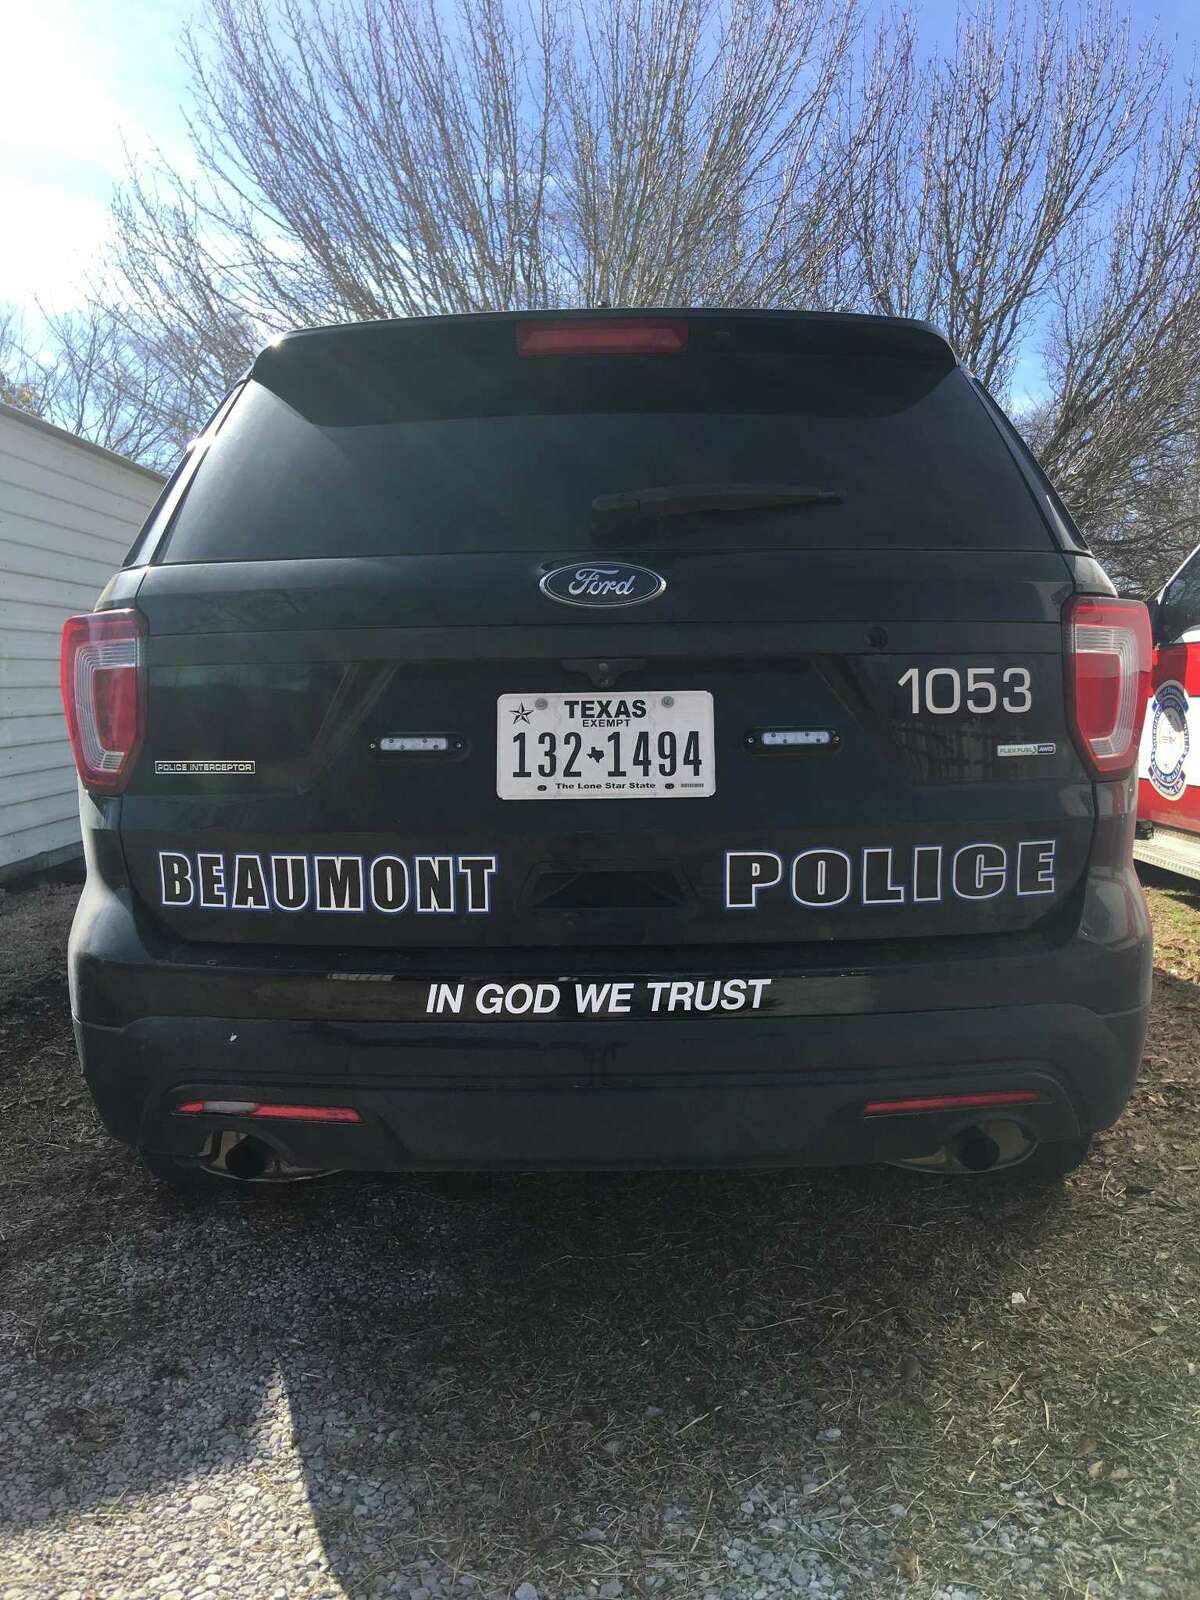 Beaumont City Council approved adding "In God We Trust" decals to the city's public safety vehicles. The decals, which have not yet been purchased, may look like these examples created by the city.